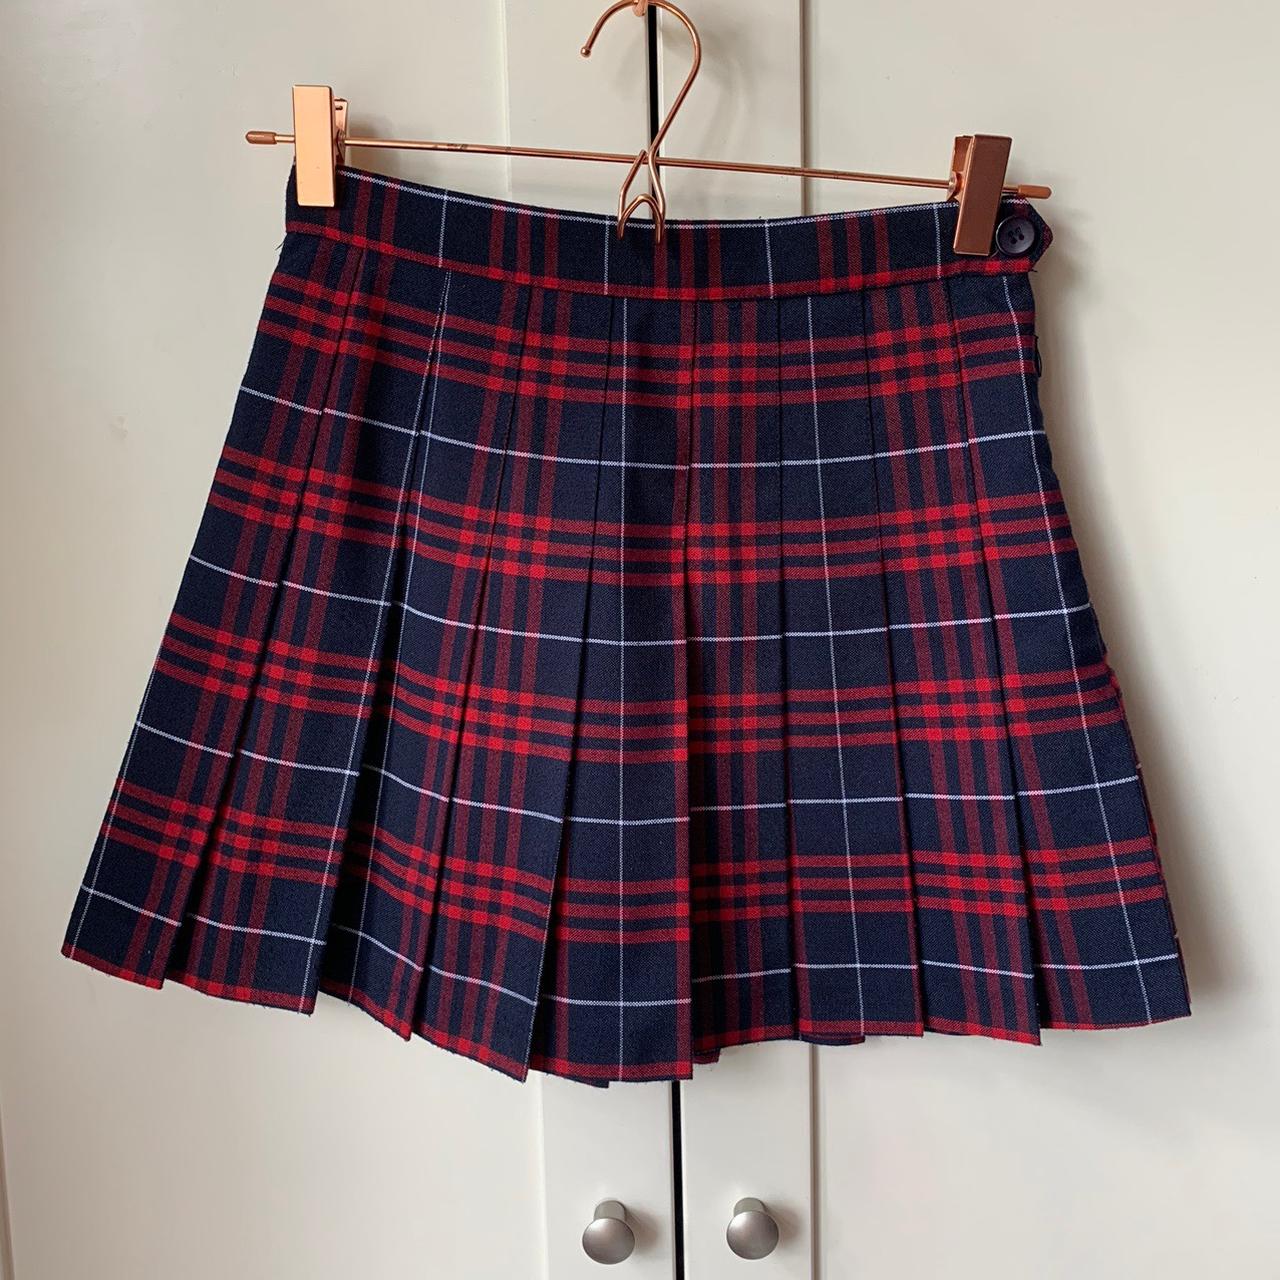 American Apparel Women's Red and Navy Skirt